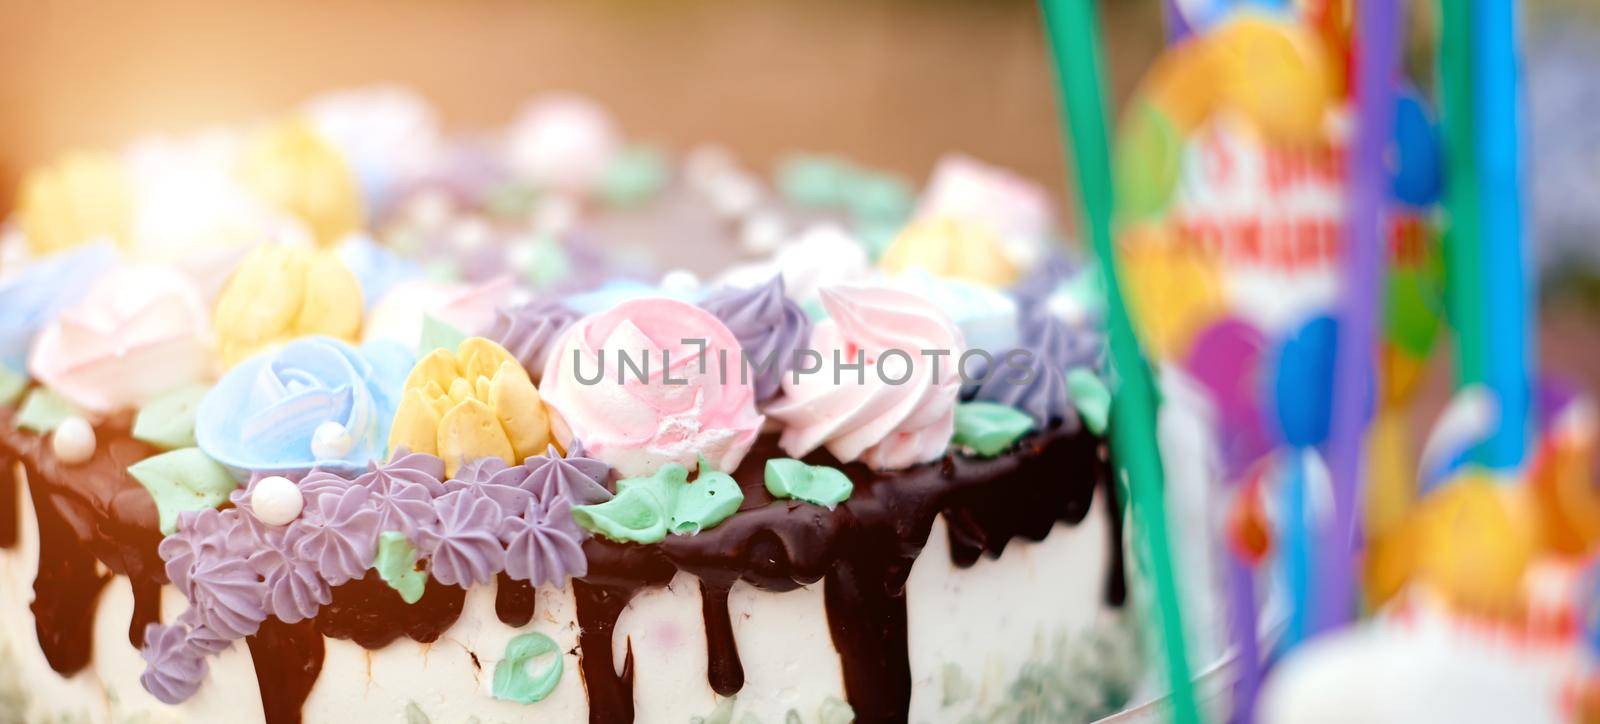 very delicious beautiful cake with cream roses and chocolate cream . High quality photo